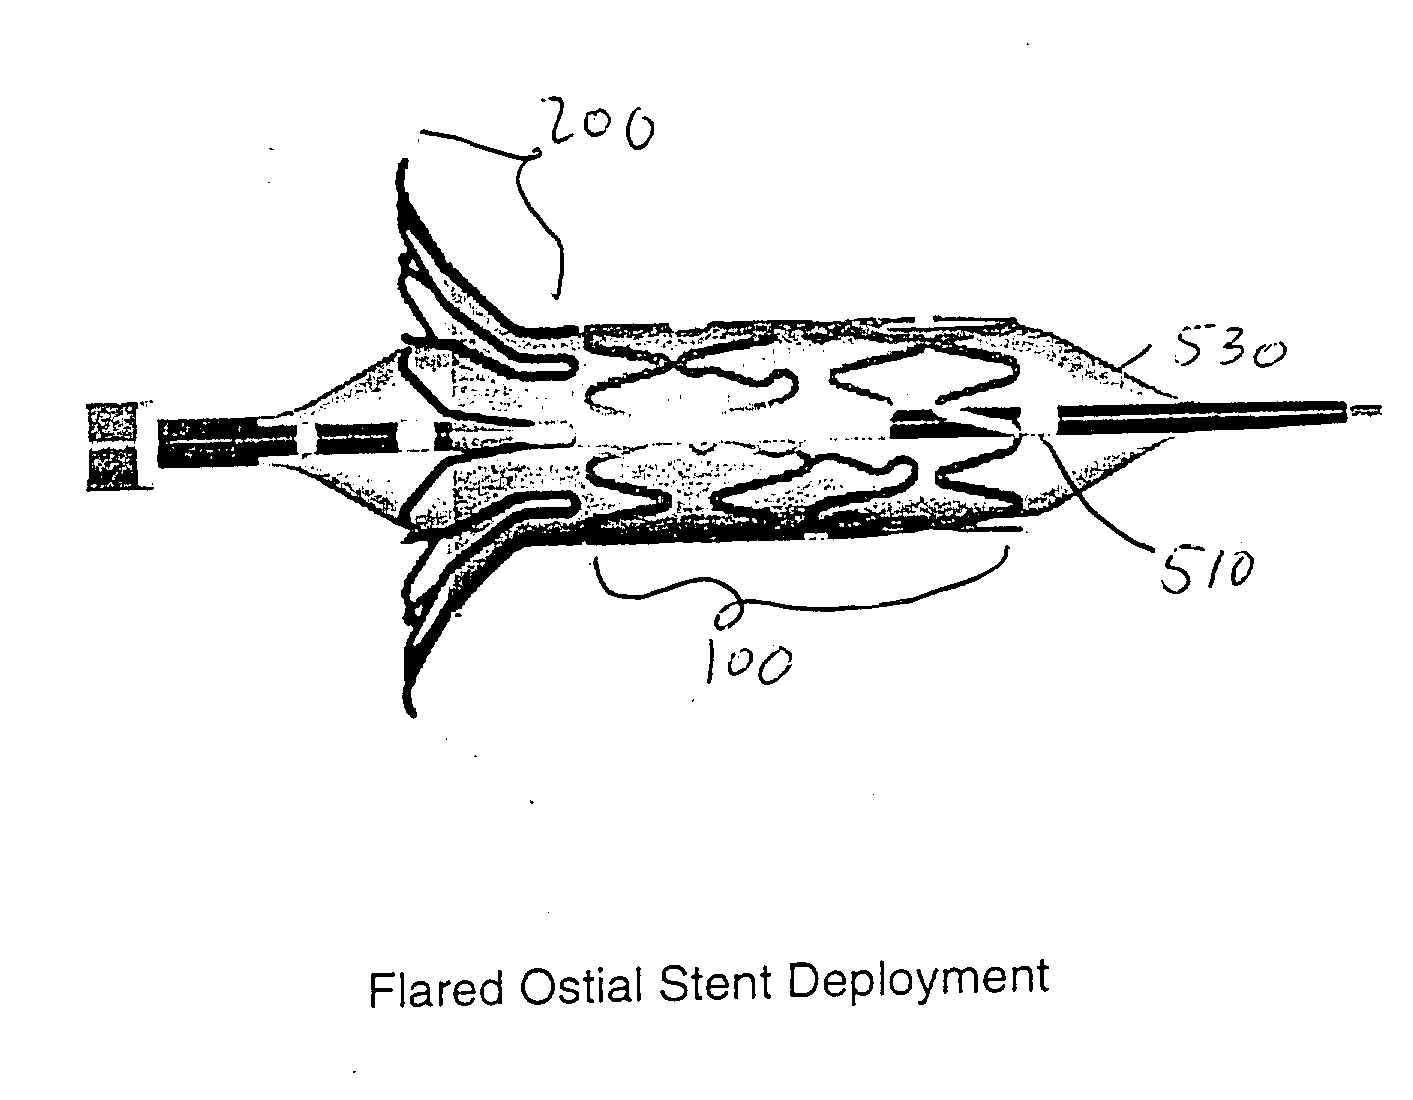 Flared ostial endoprosthesis and delivery system